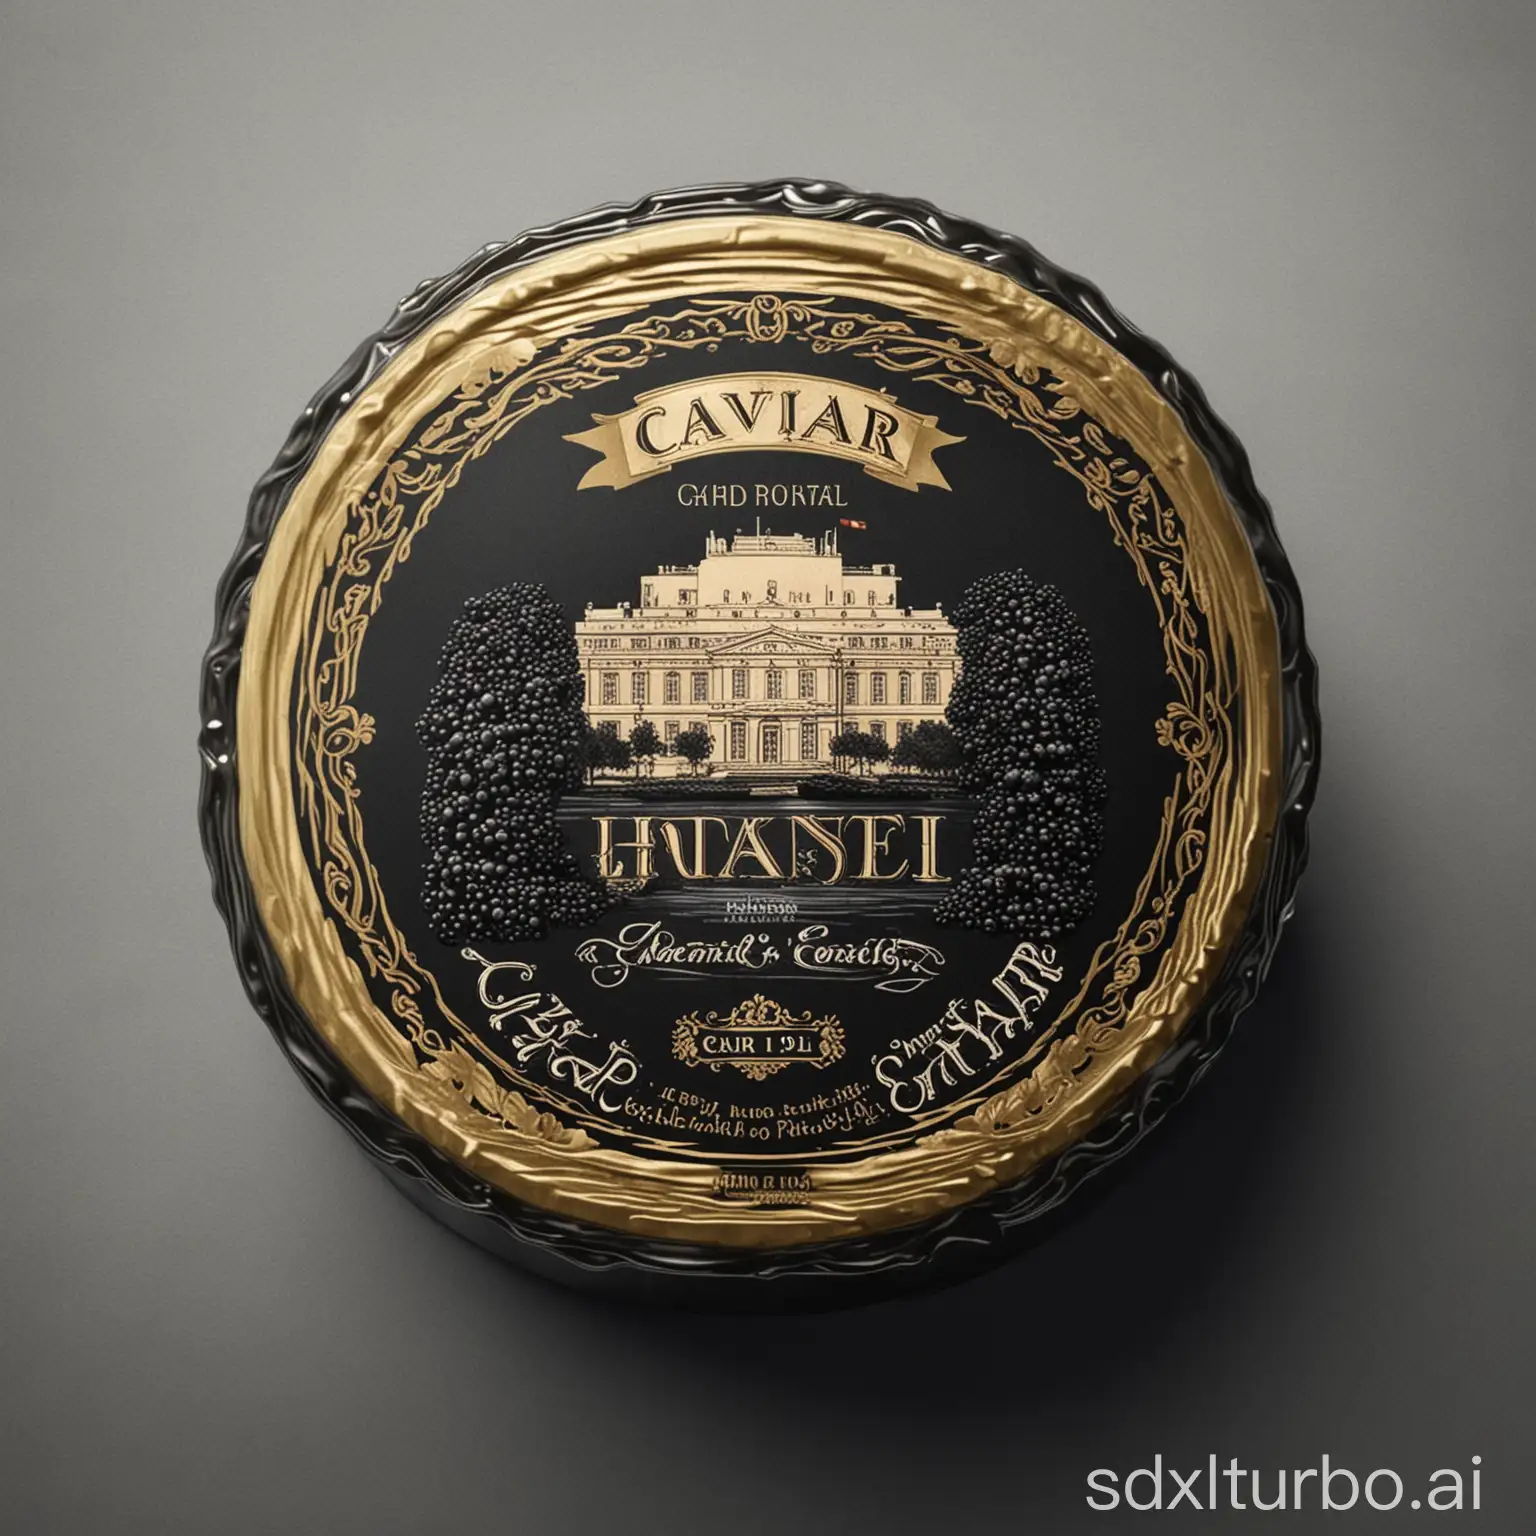 very realistic caviar can label design, Grand Hotel, with hotel illustration